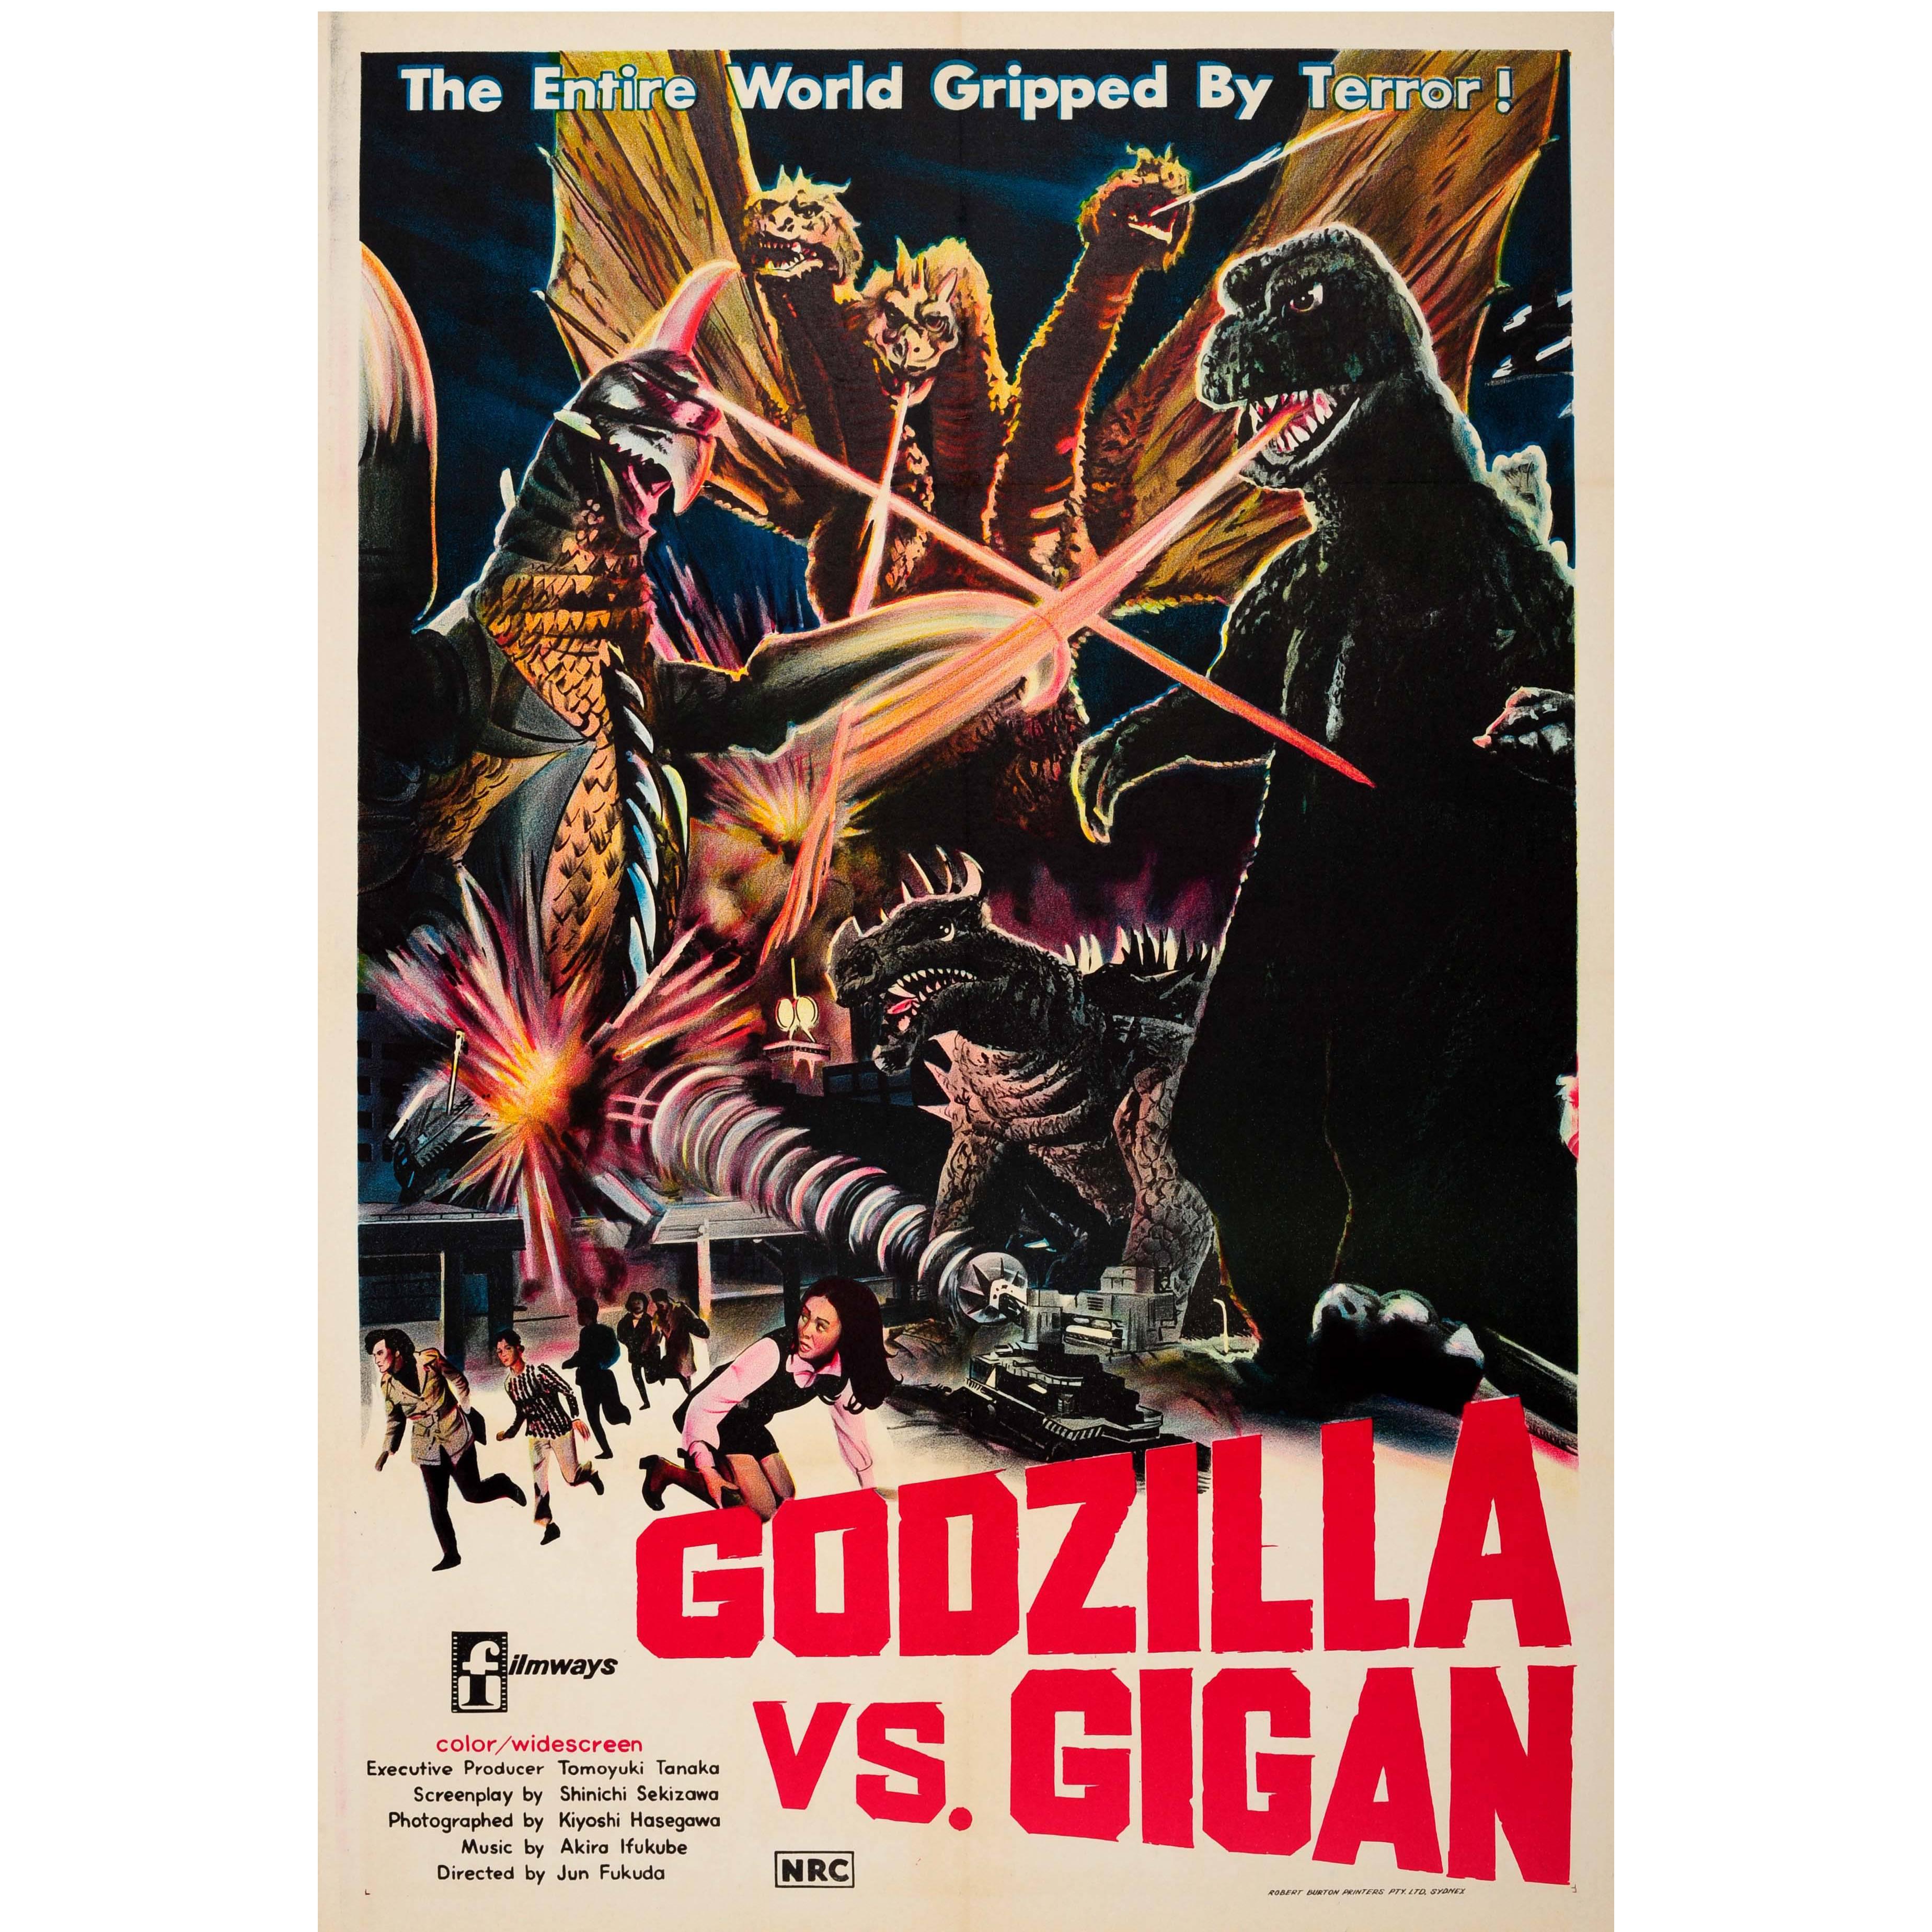 Original Vintage Movie Poster for the Australian Release of Godzilla Vs. Gigan For Sale